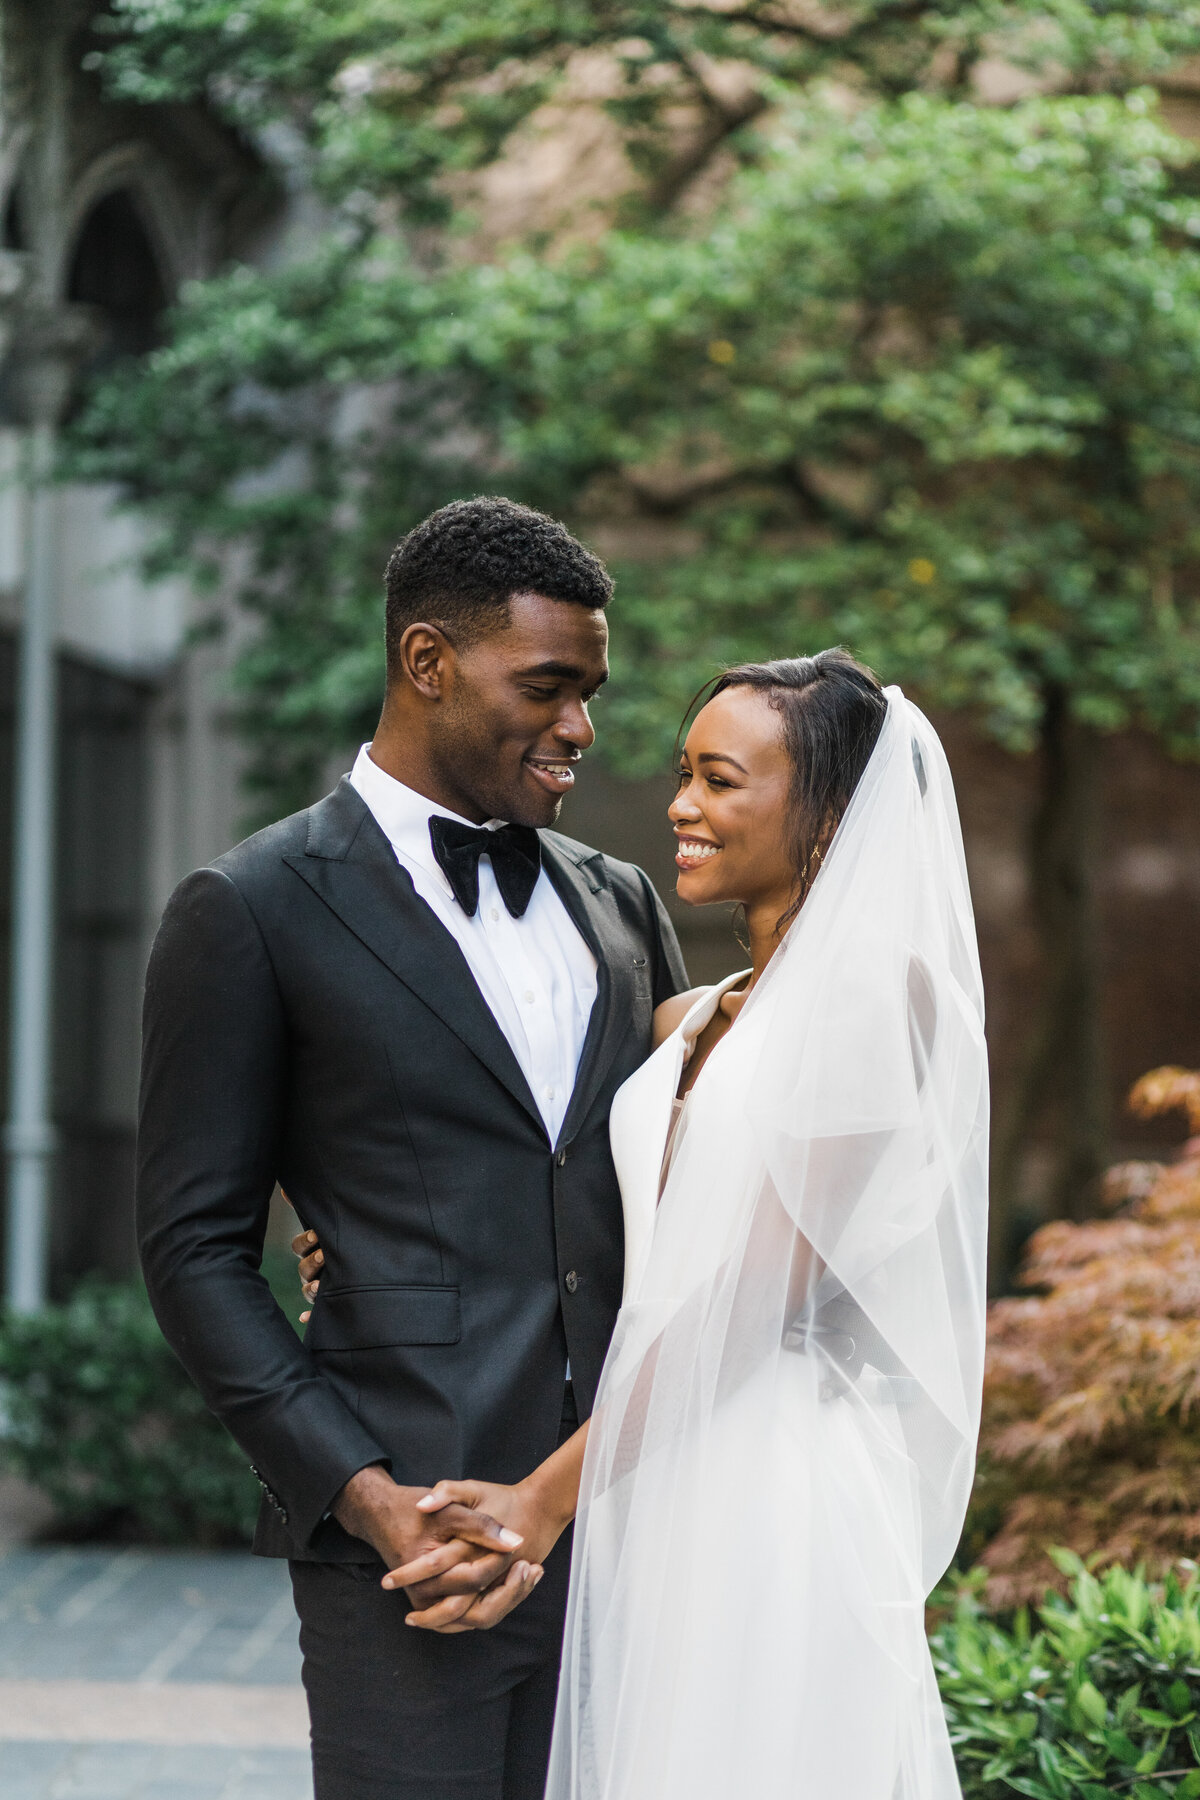 A portrait of a bride and groom posing joyfully together on their wedding day at the Hotel Crescent Court in Dallas, Texas. The bride is on the right and is wearing an elegant white dress with a long flowing veil. The groom is on the left and is wearing a tuxedo with a black bowtie. They are both holding each other close and holding hands.